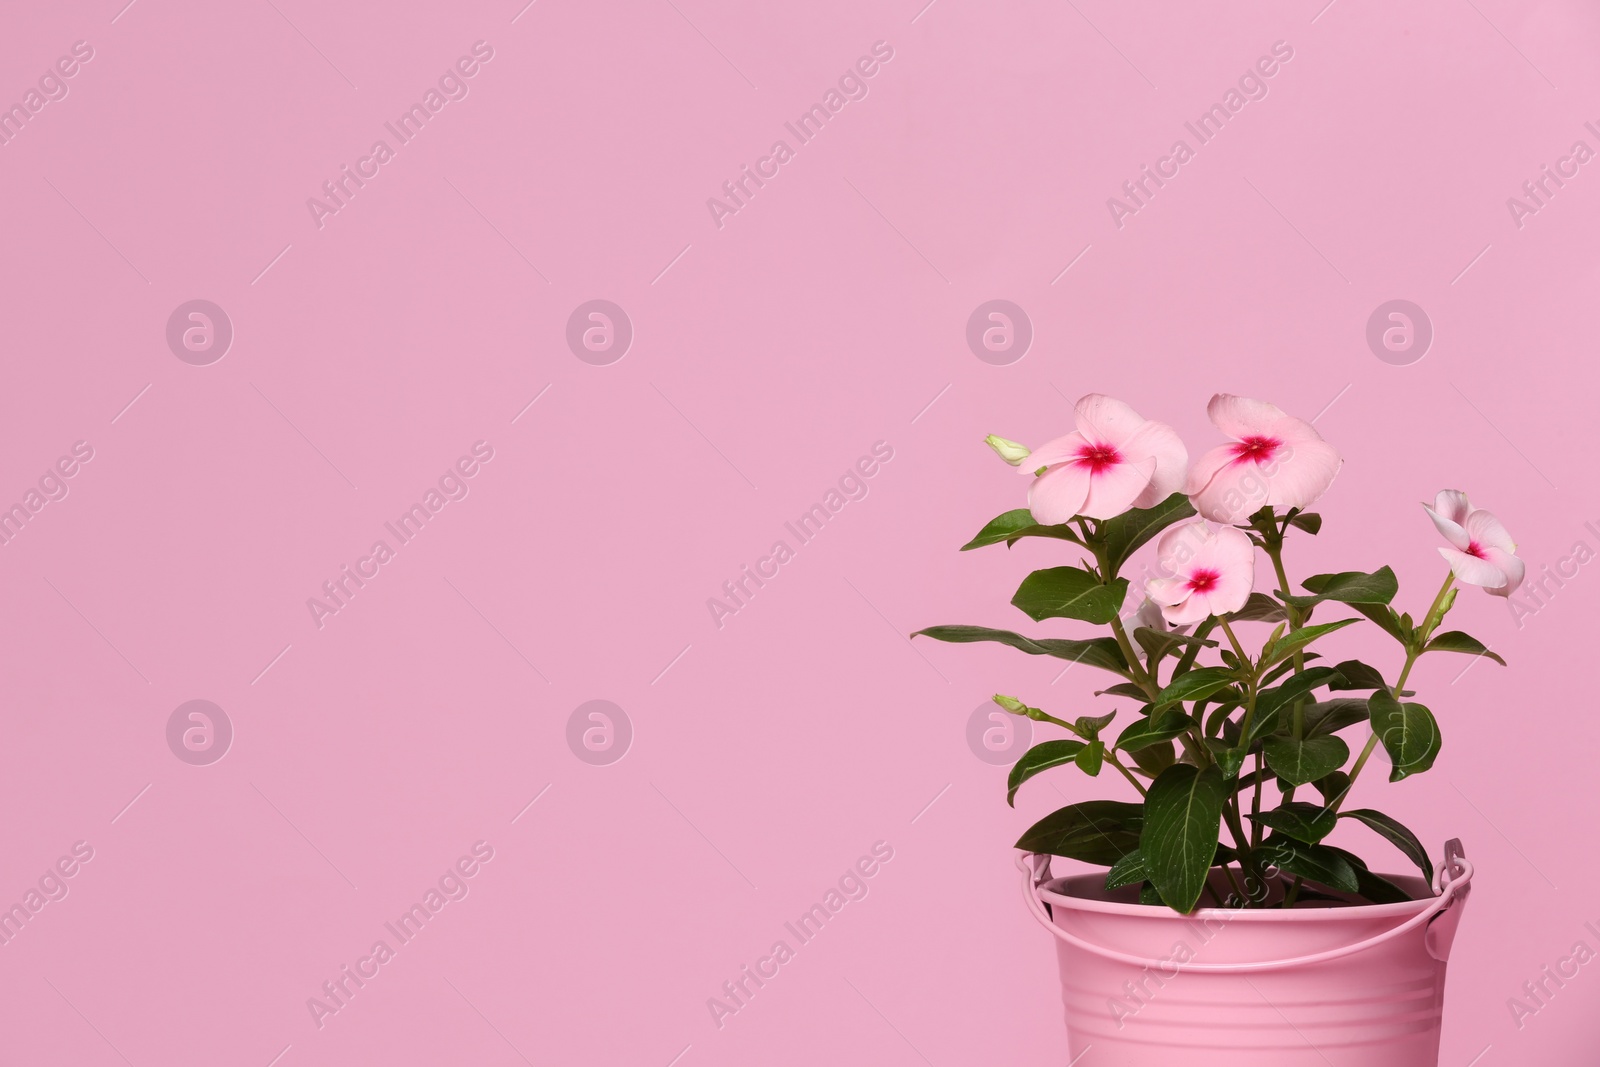 Photo of Catharanthus roseus in flower pot on pink background. Space for text